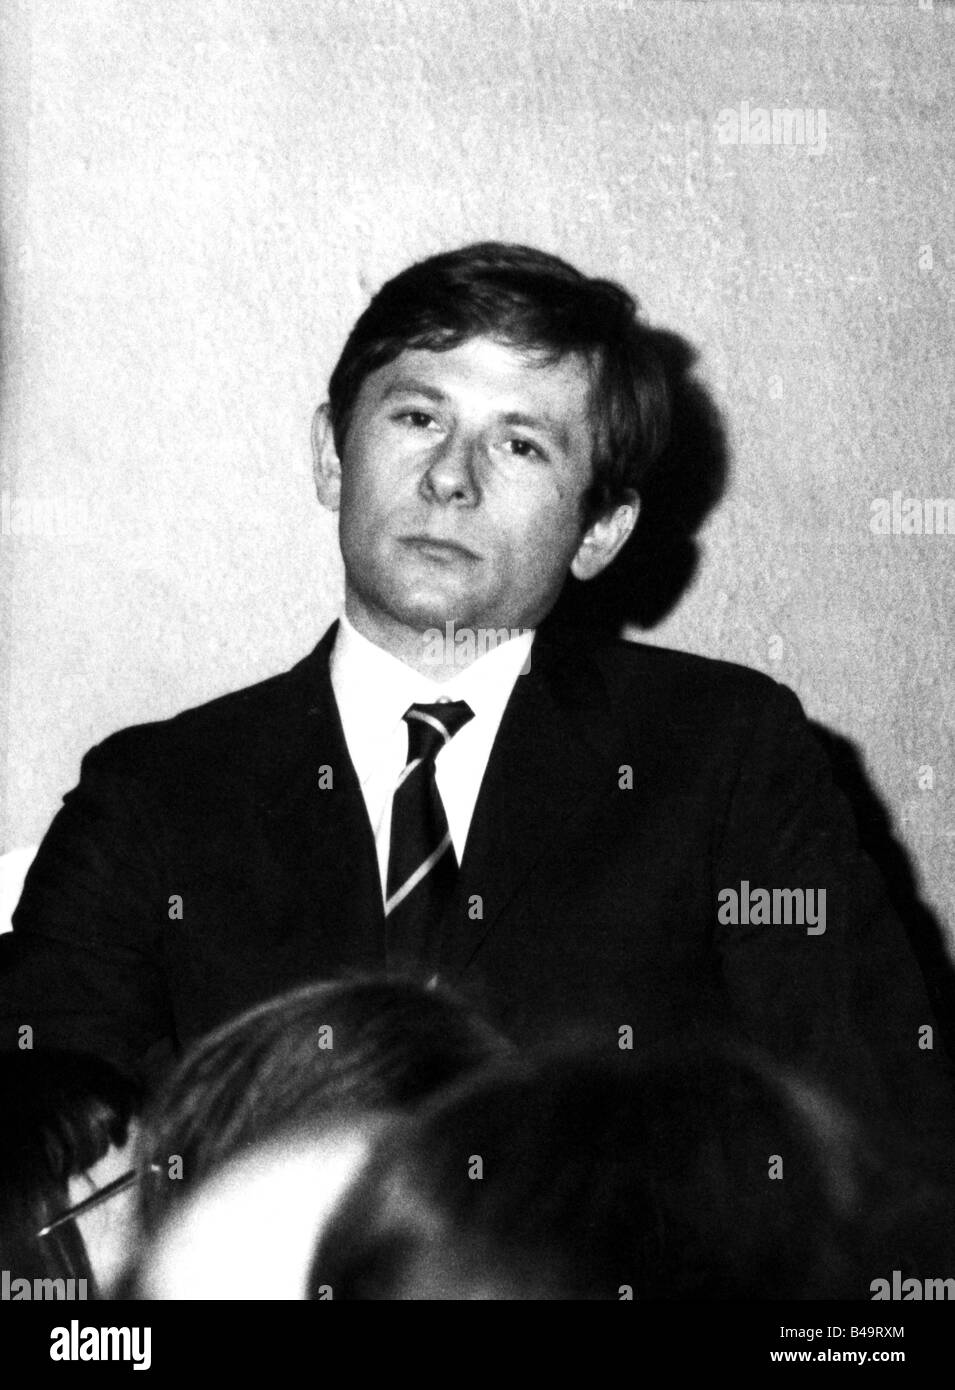 Polanski, Roman, * 18.8.1933, french director and actor, half length, at event, 'Dekadenz bei Gielow', discussion, discotheque P1, Munich, 24.2.1964, Stock Photo